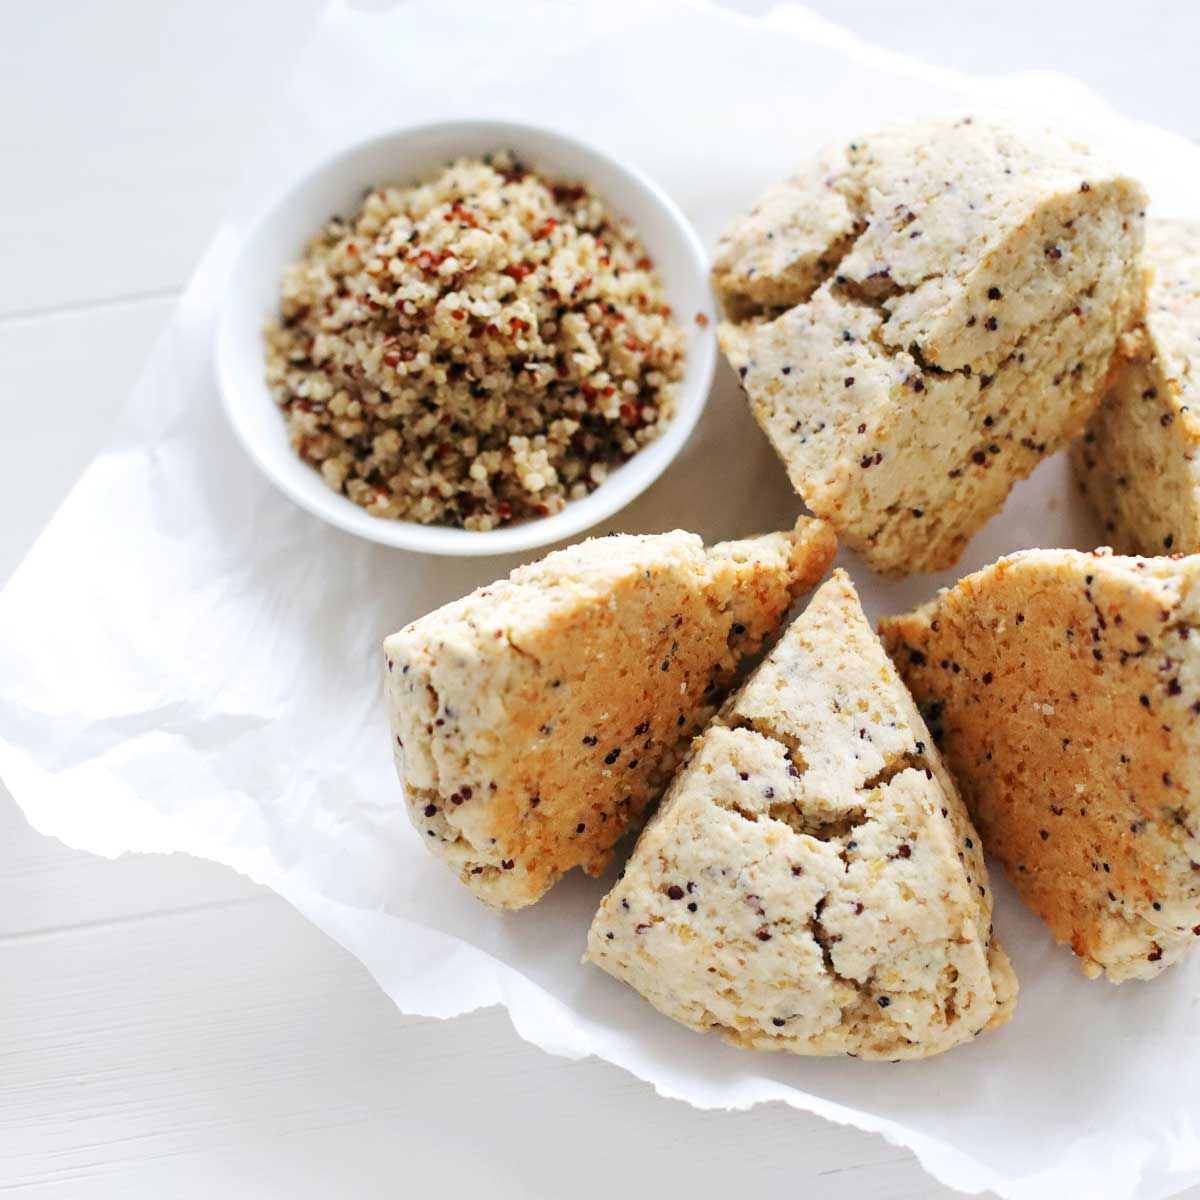 Nutty and Wholesome: Quinoa Scones for a Healthy, Vegan Twist